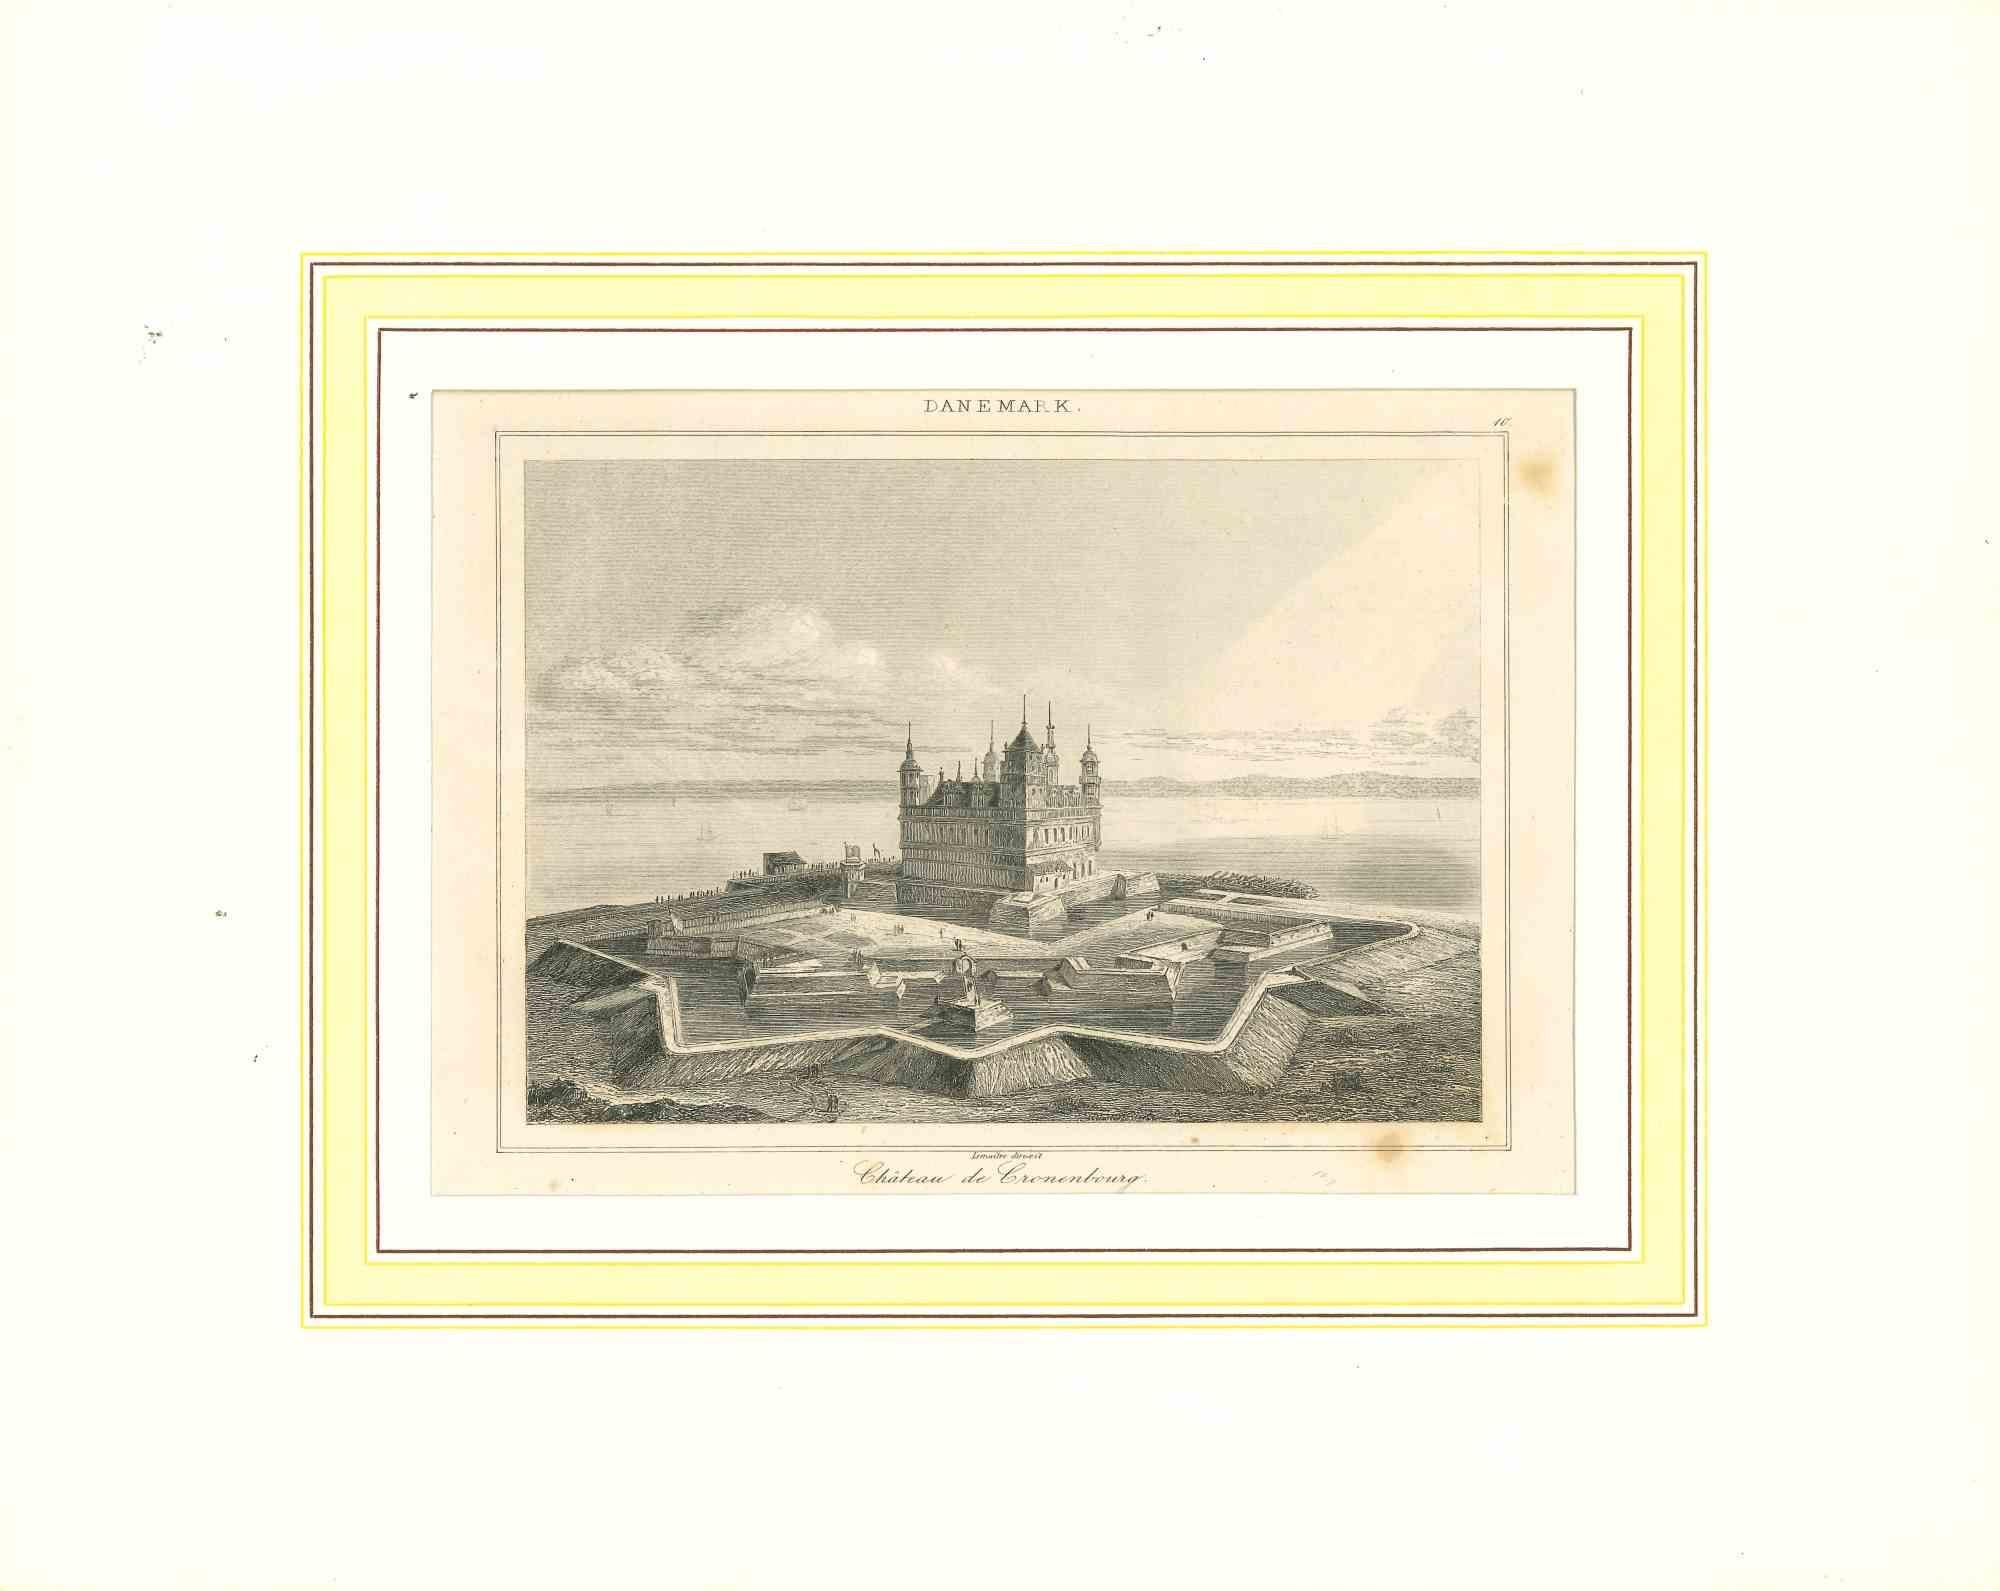 Ancient View of Chateau de Chronenbourg-Original Lithograph - Early 19th Century